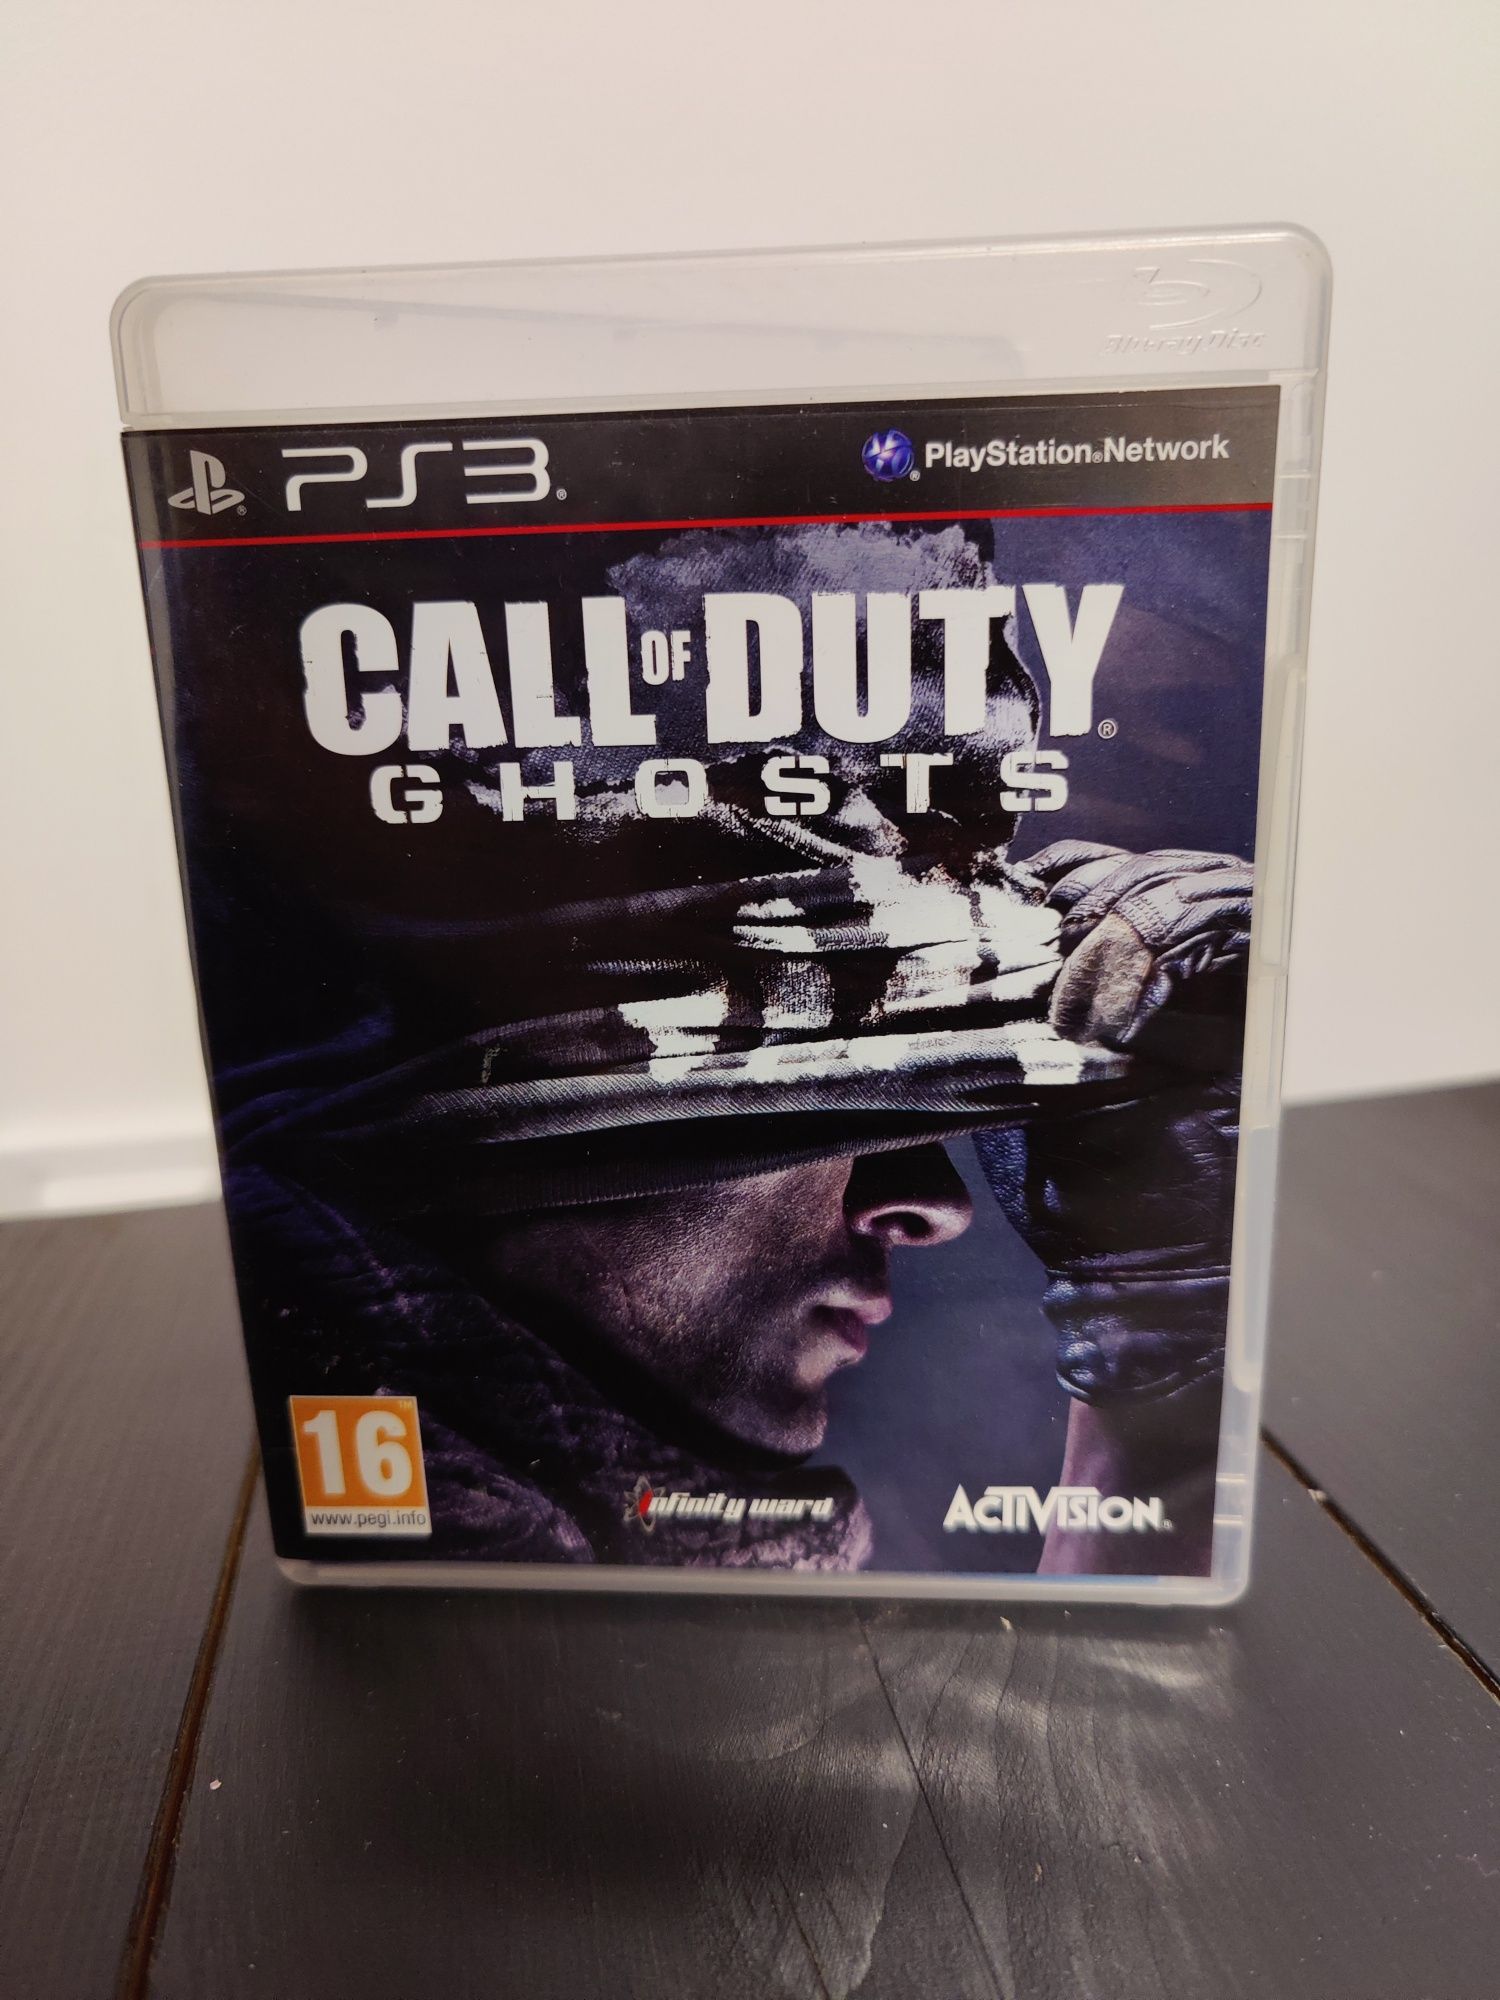 Call of Duty Ghosts PS3